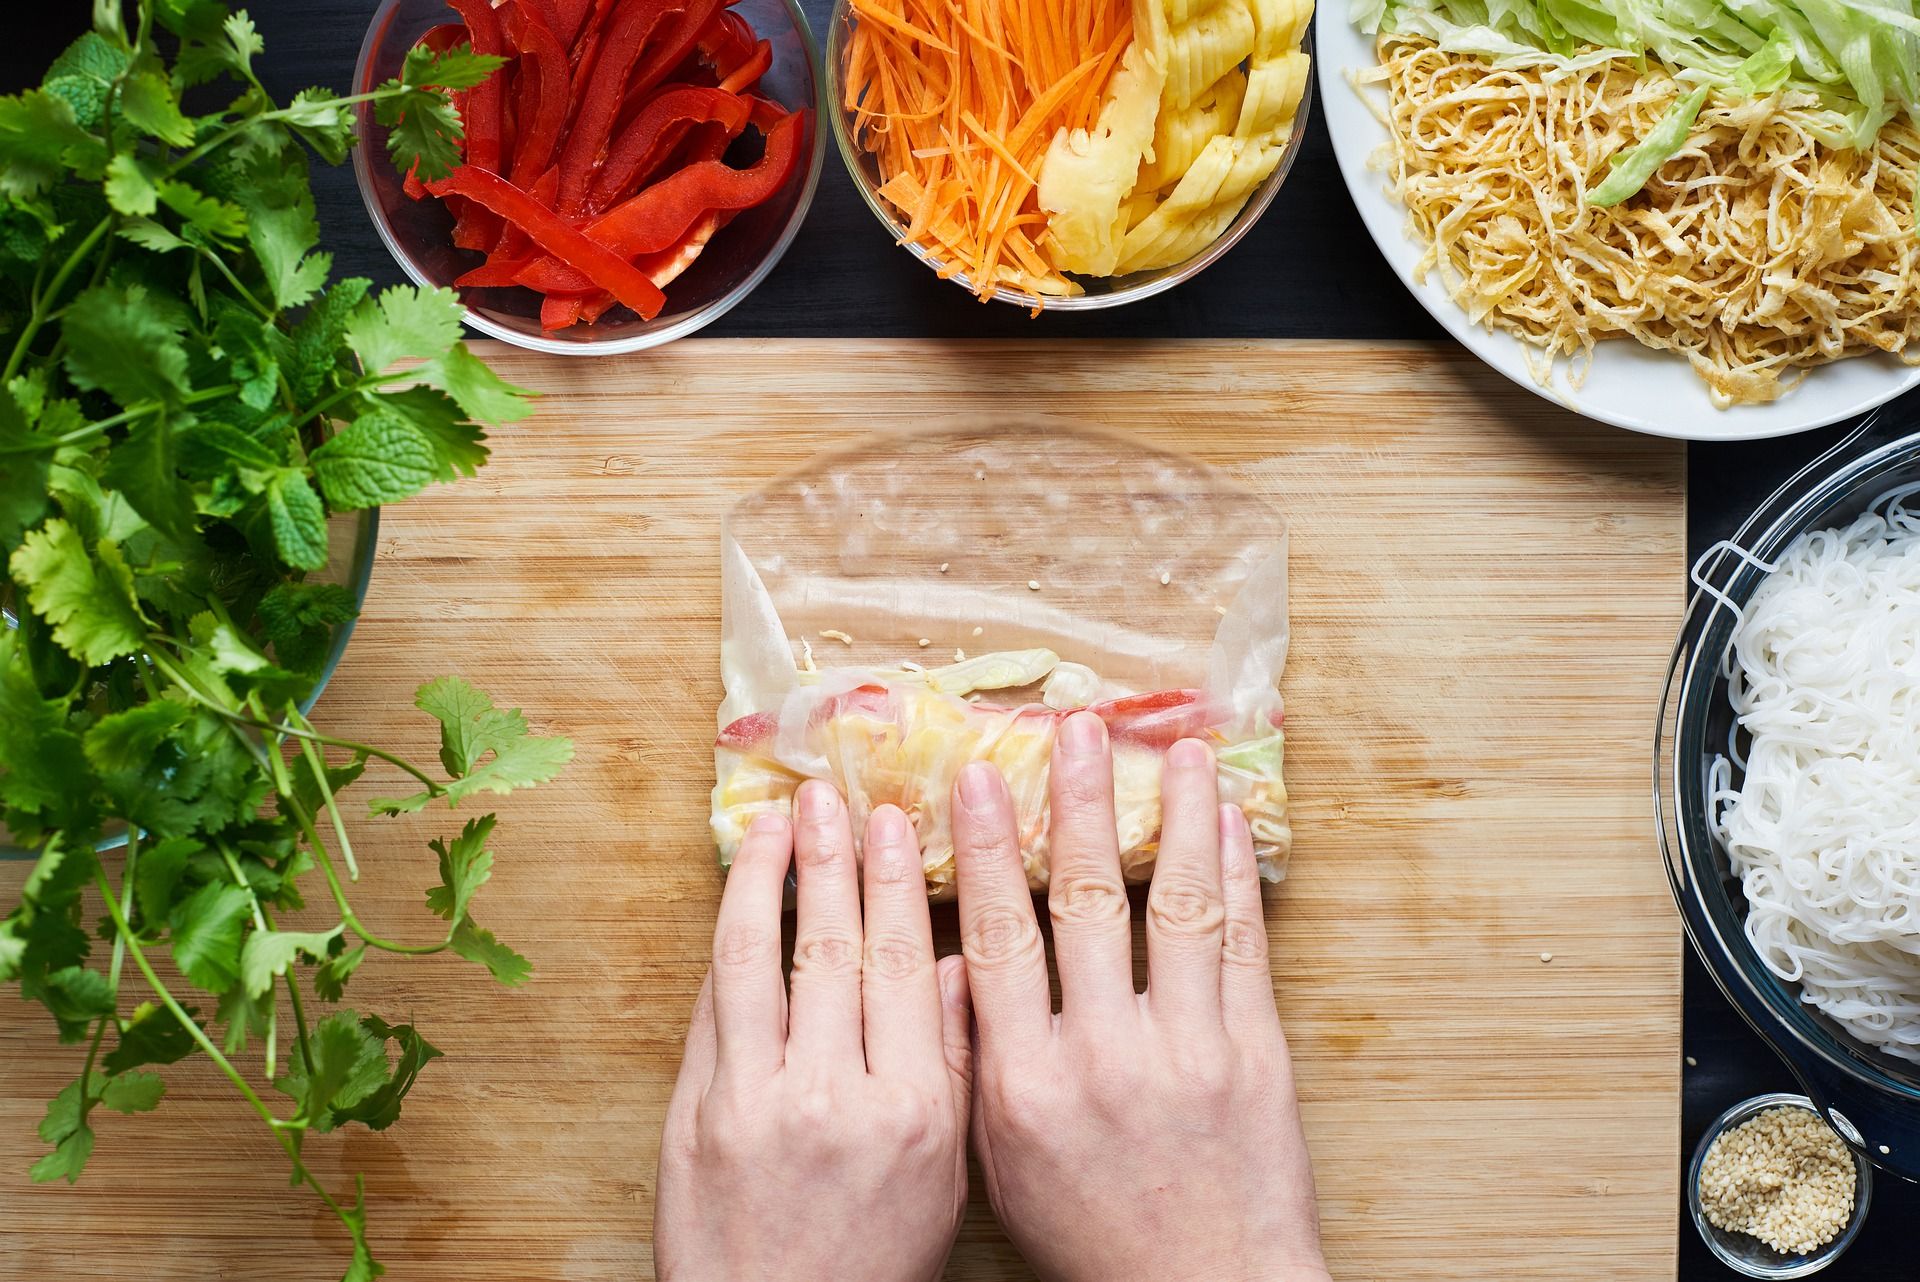 A person rolling a spring roll with vegetables